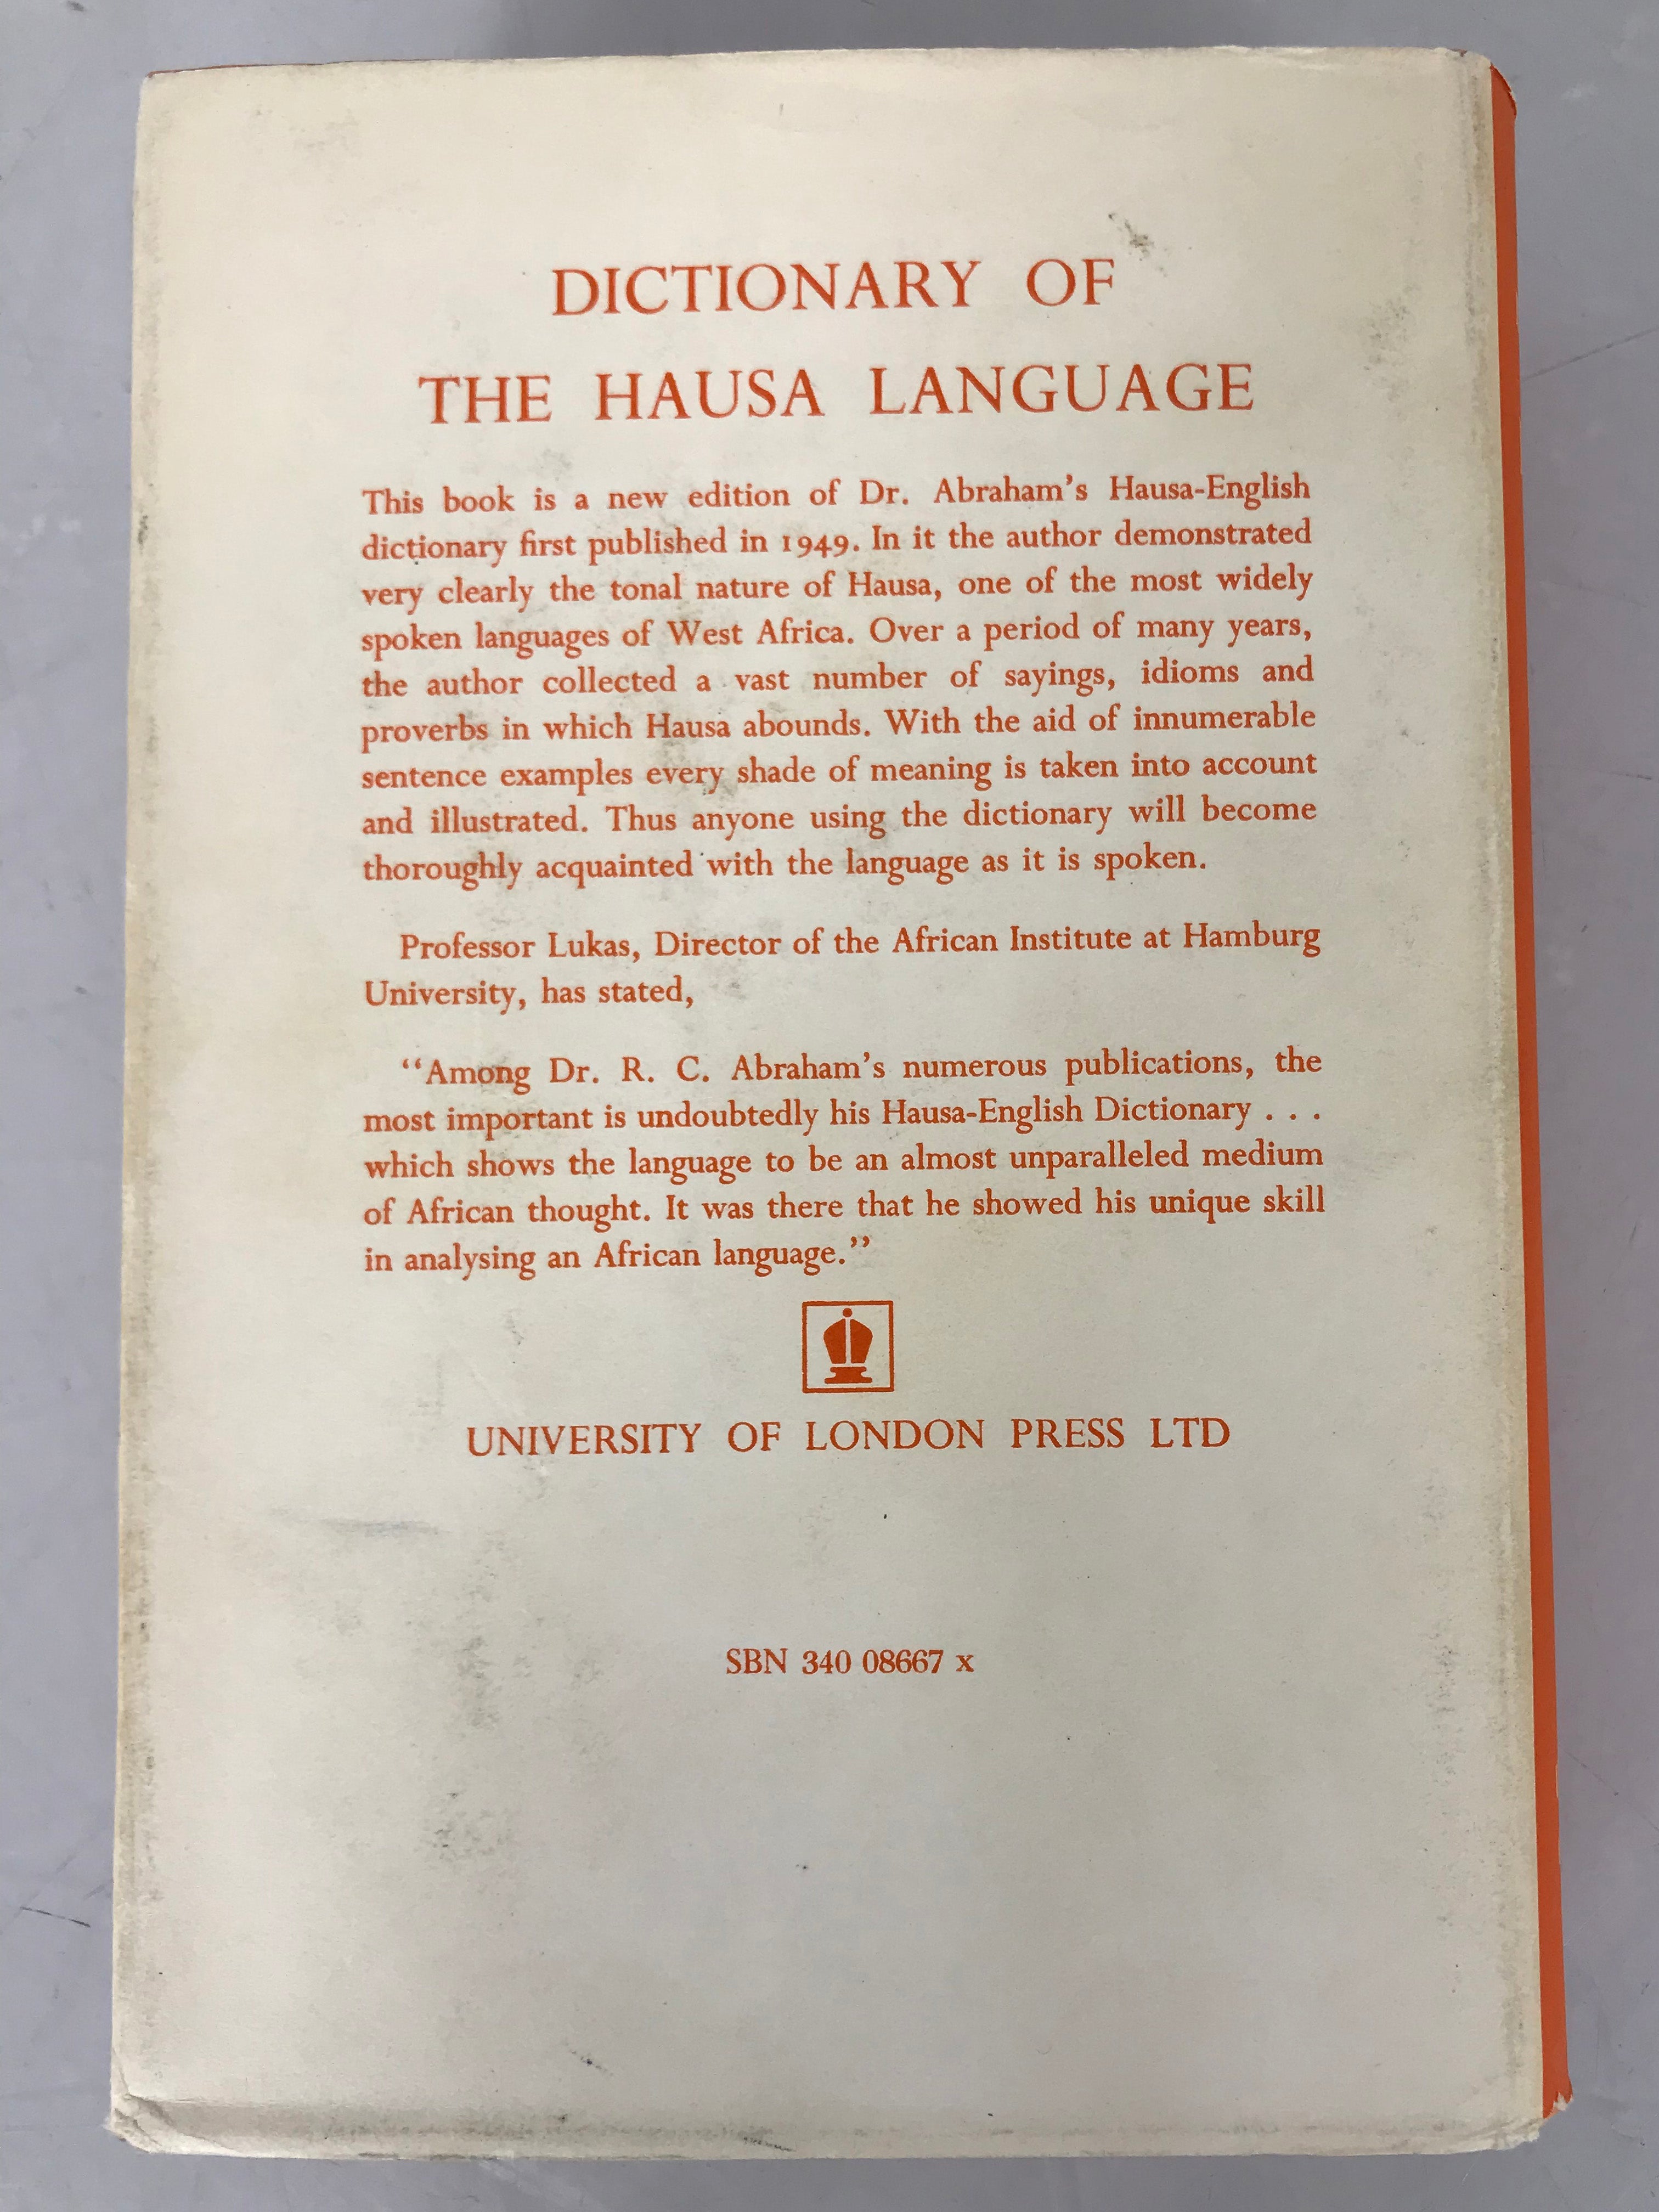 Dictionary of the Hausa Language by R.C. Abraham 1968